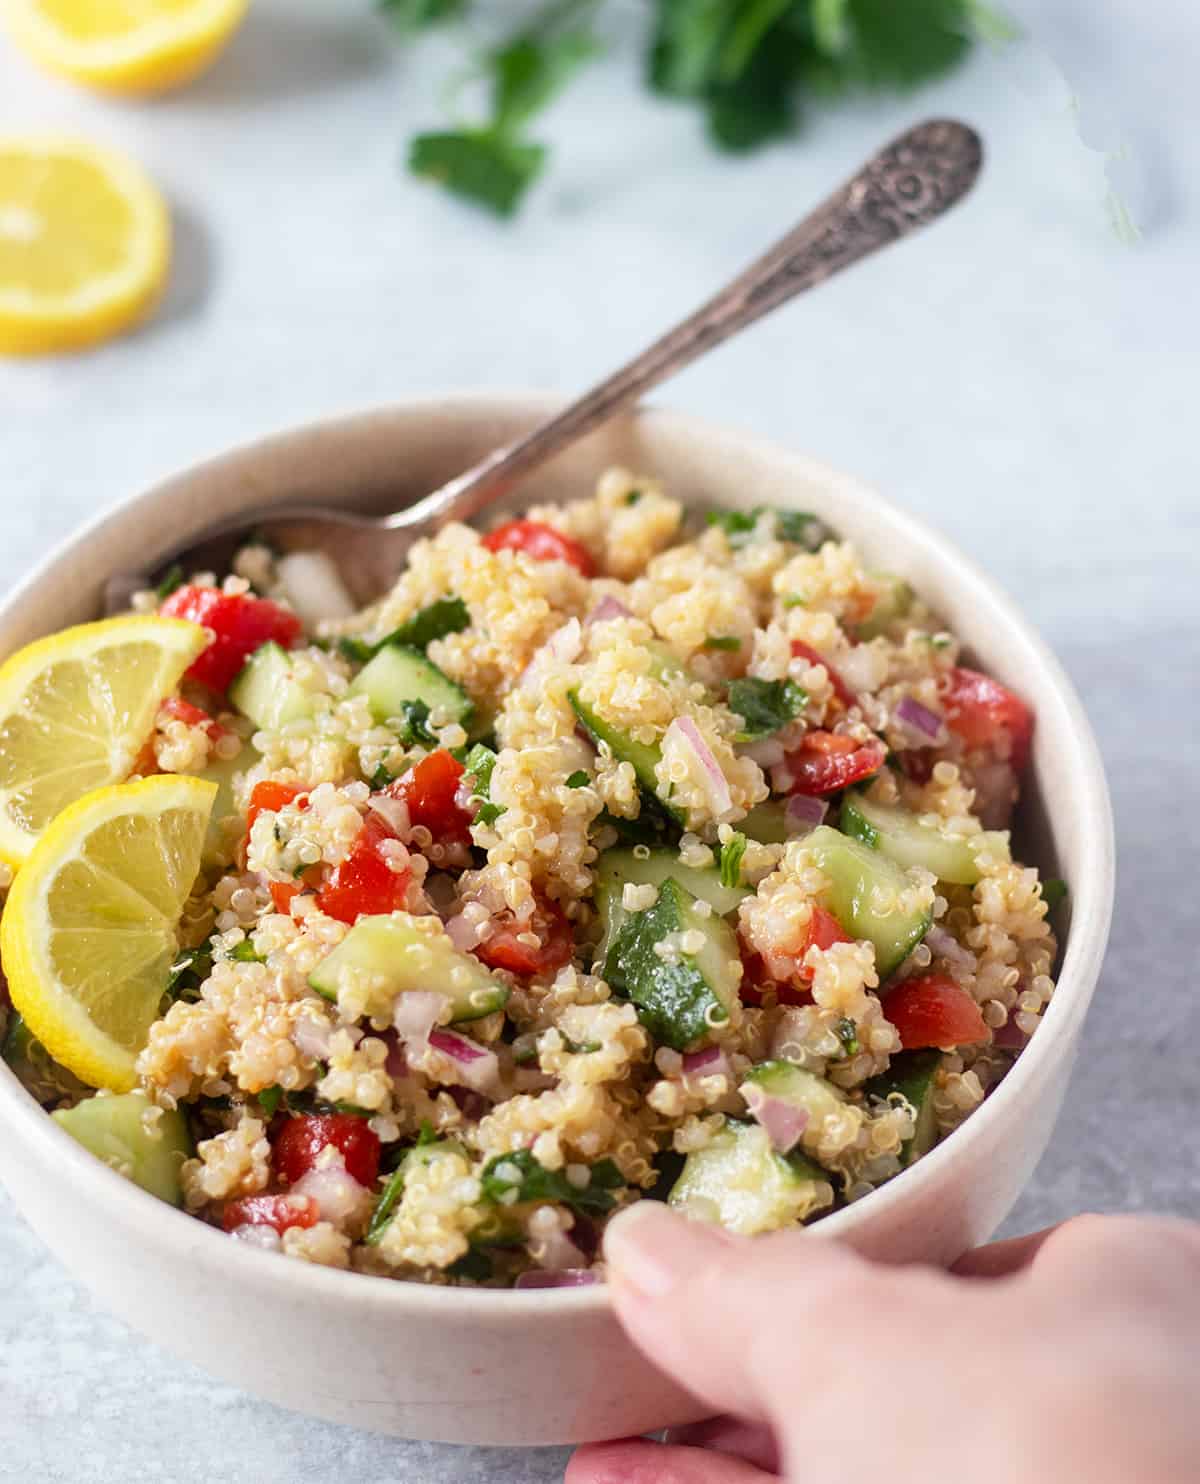 quinoa tabbouleh in a white bowl garnished with lemon slices and a silver spoon for serving. A hand holding the side of the bowl.